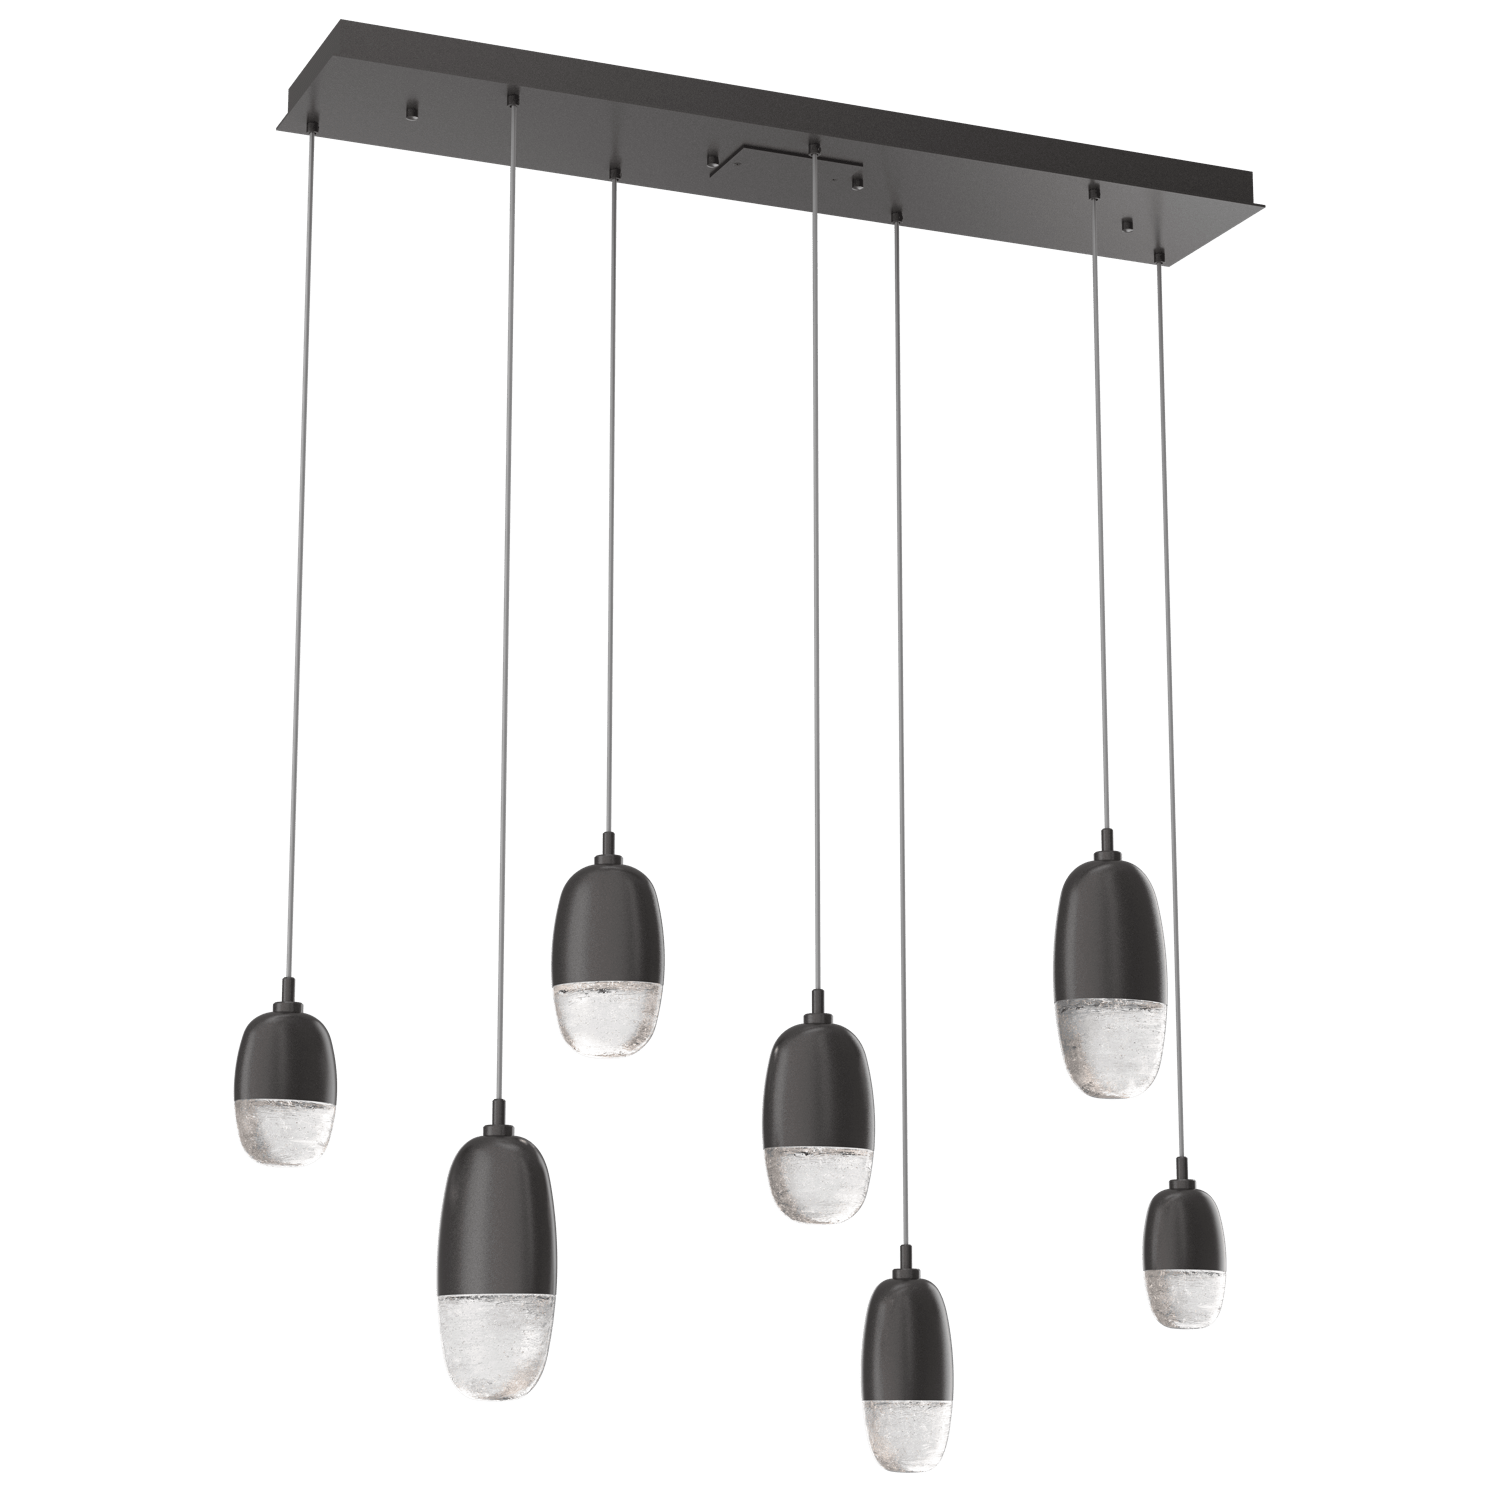 PLB0079-07-GP-Hammerton-Studio-Pebble-7-light-linear-pendant-chandelier-with-graphite-finish-and-clear-cast-glass-shades-and-LED-lamping